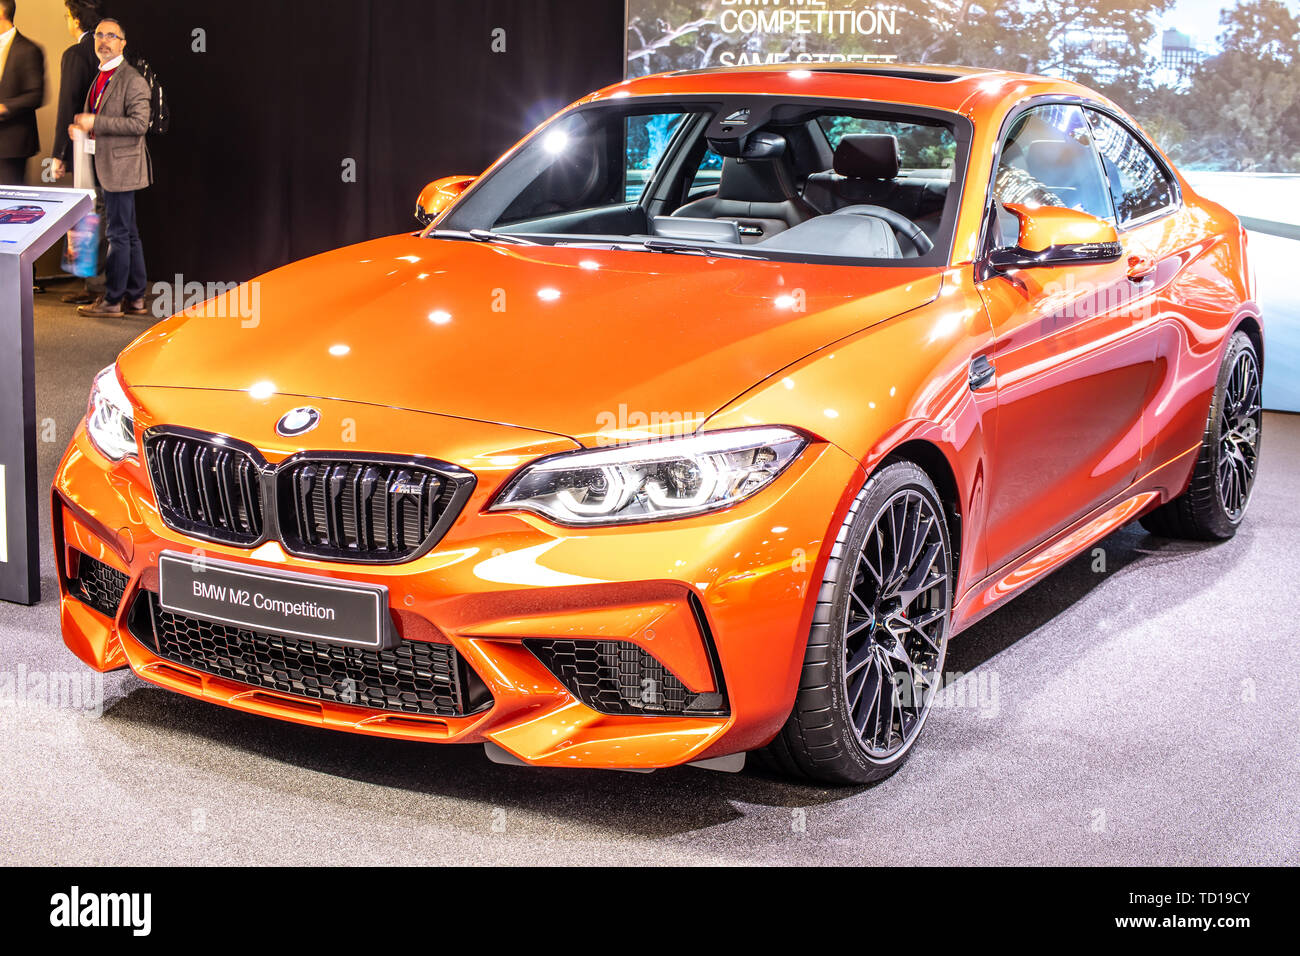 Geneva, Switzerland, March 05, 2019: metallic orange BMW M2 Coupe  Competition at Geneva International Motor Show, manufactured and marketed  by BMW Stock Photo - Alamy